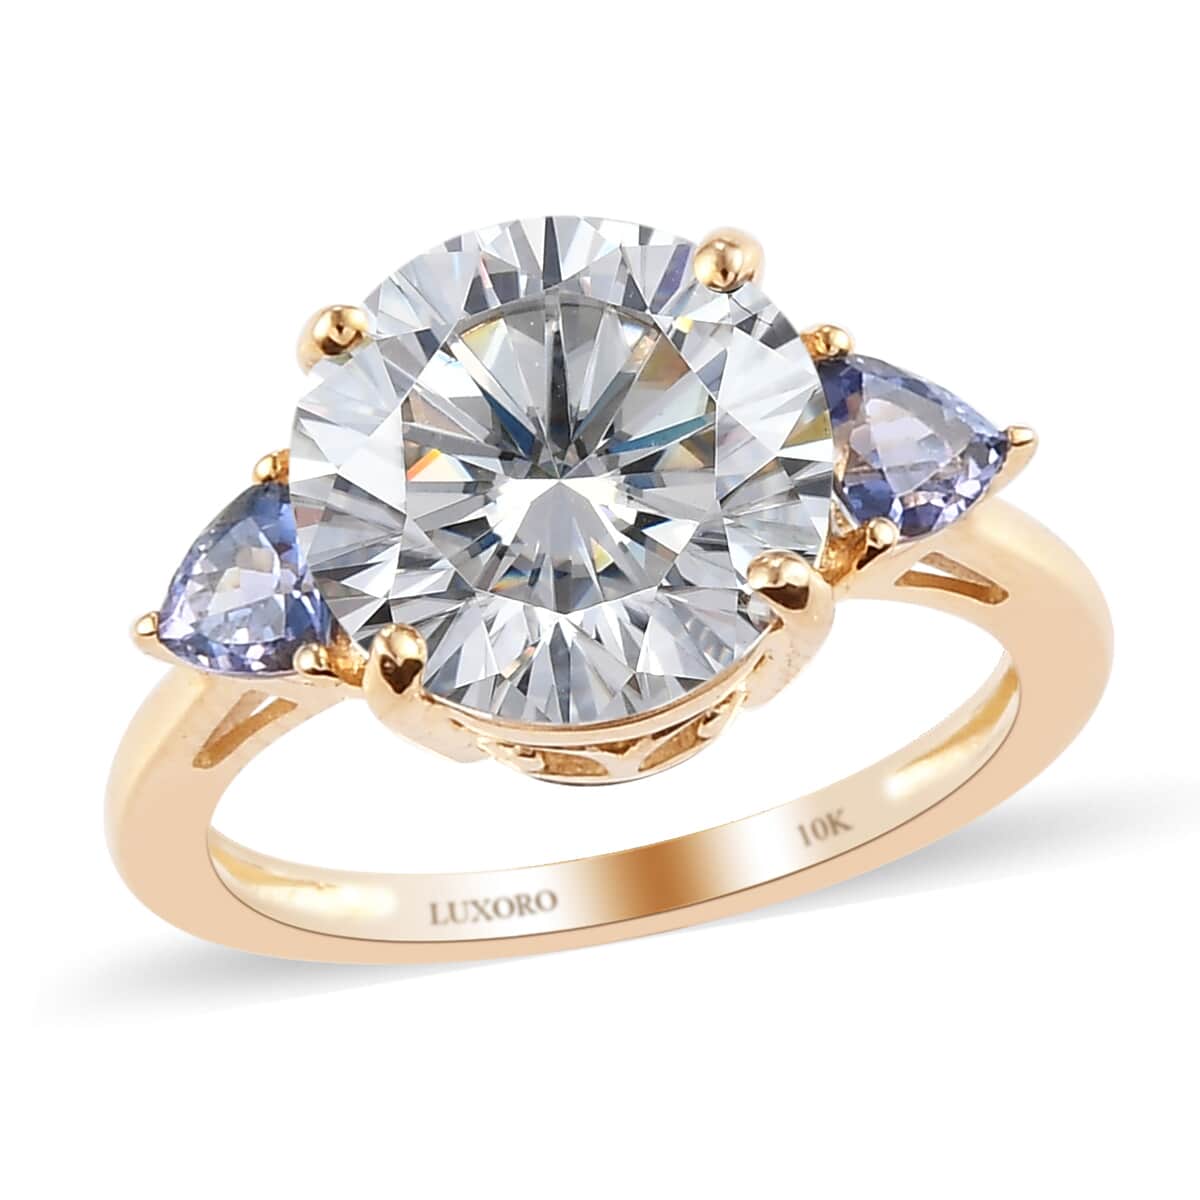 LUXORO 10K Yellow Gold Moissanite and Tanzanite 3 Stone Ring (Size 9.0) 3.50 Grams 4.30 ctw image number 0